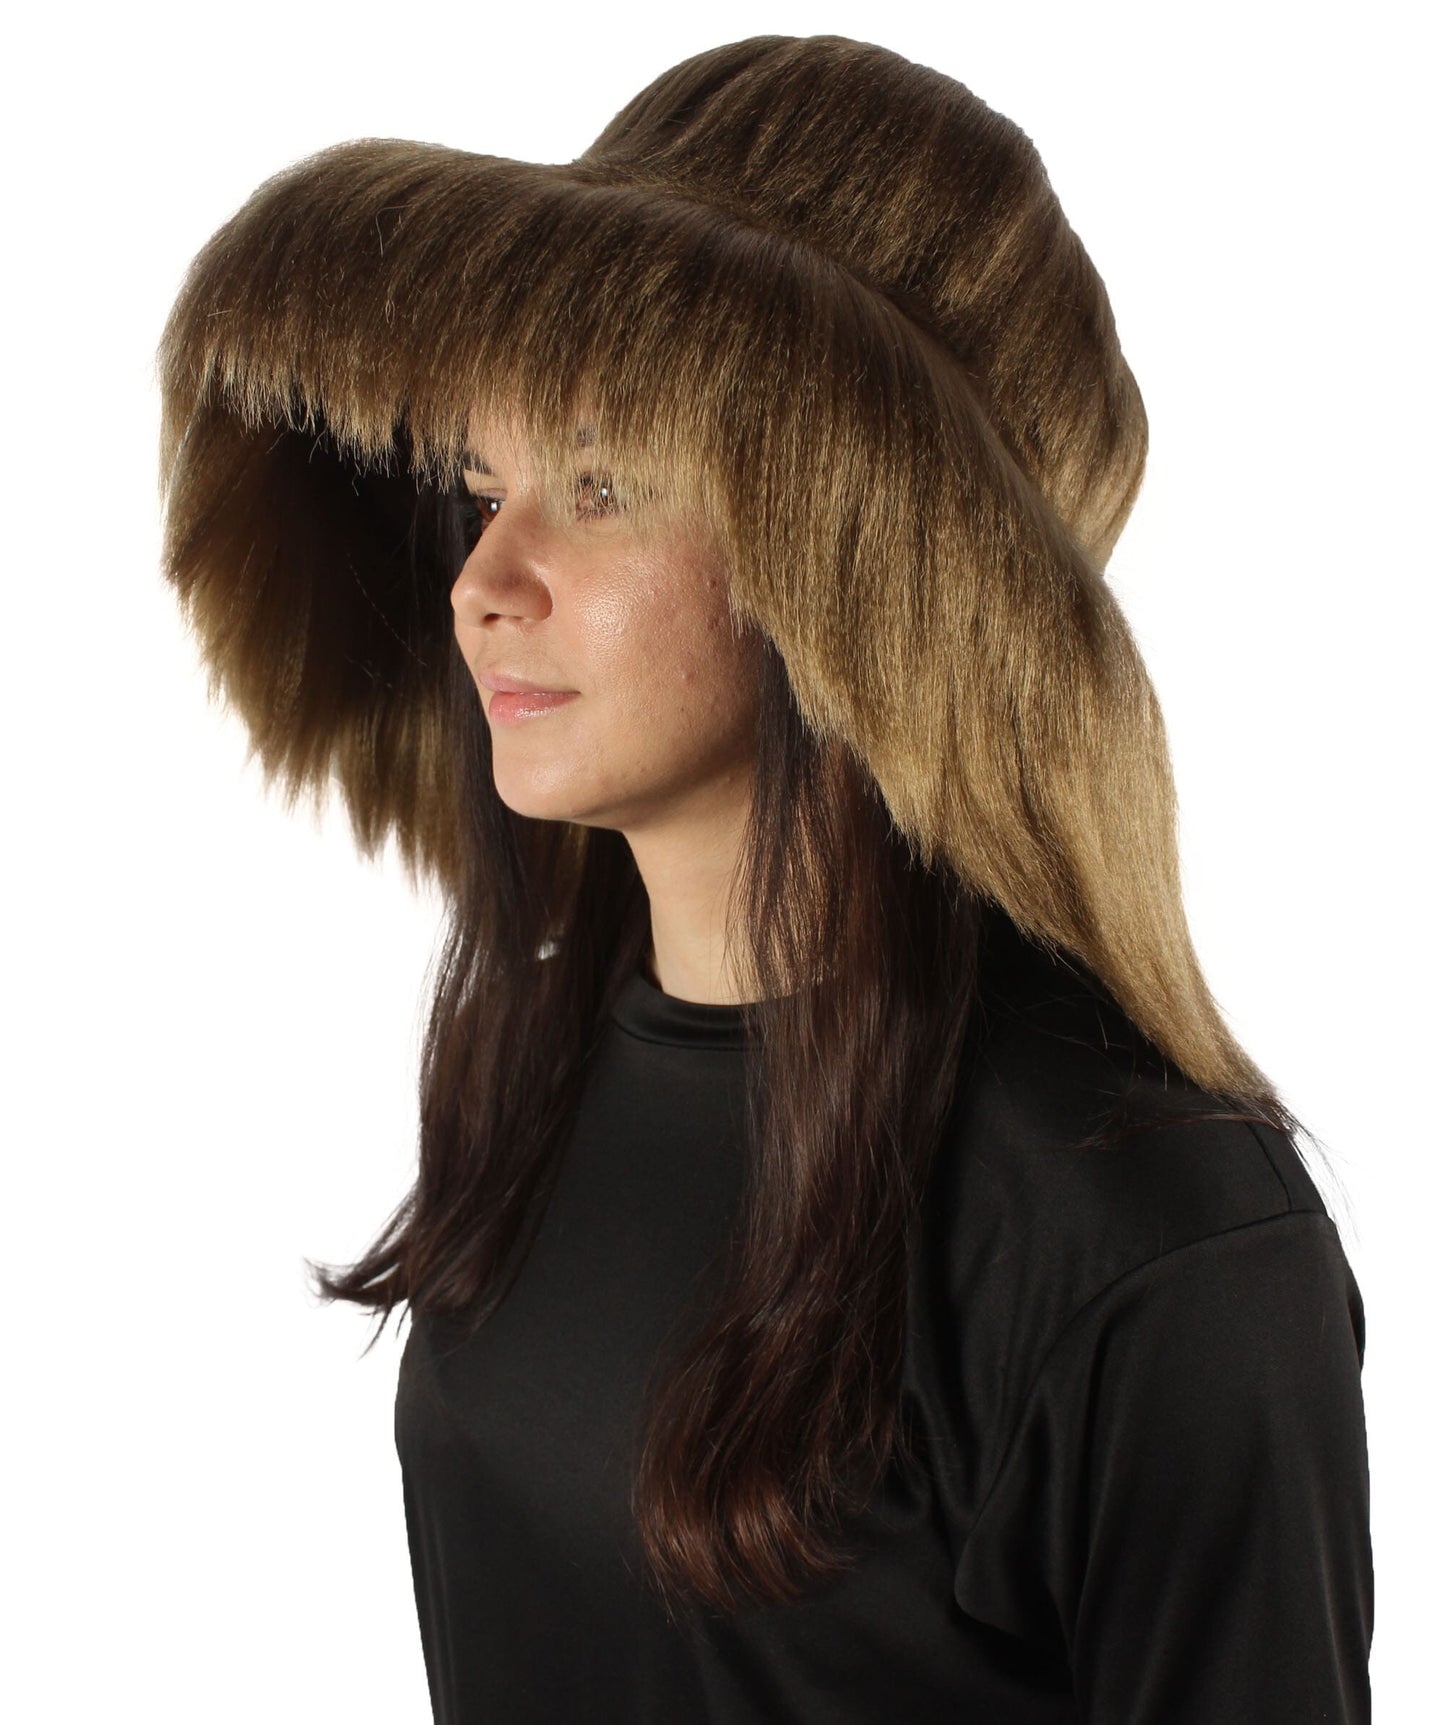 Light Brown Unisex Multicolor Option Furry Bucket Hat Cosplay Accessory